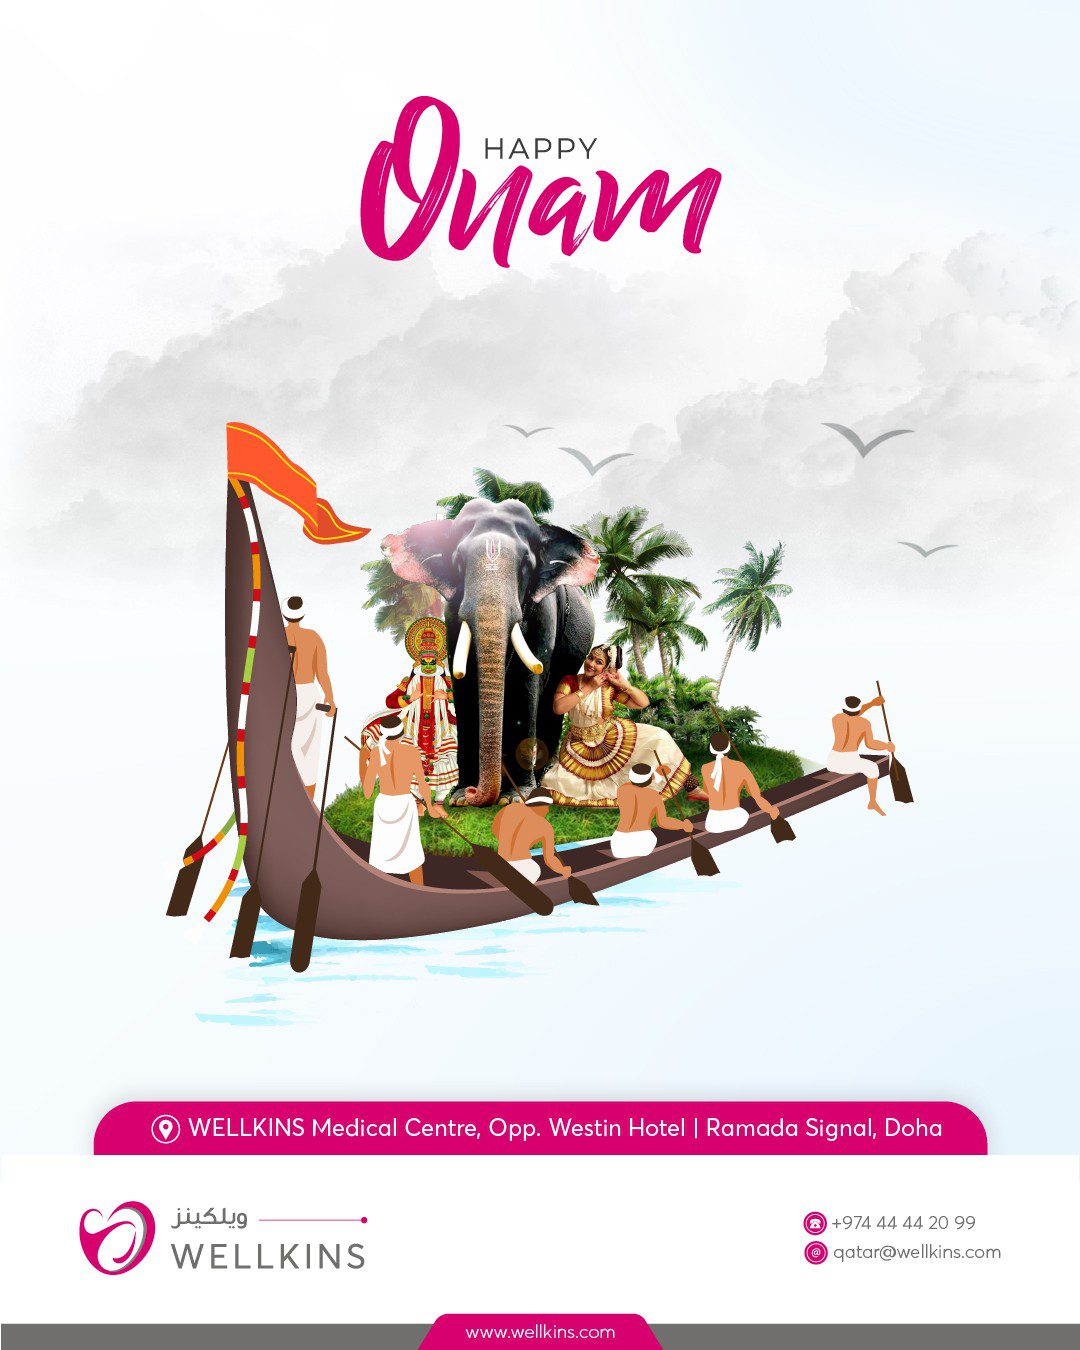 Wishing you all a prosperous, colorful, healthy and fun-filled Onam. Let this season bring you a lot of good luck, peace of mind and happiness.

#HappyOnam #onam2022 #Onam